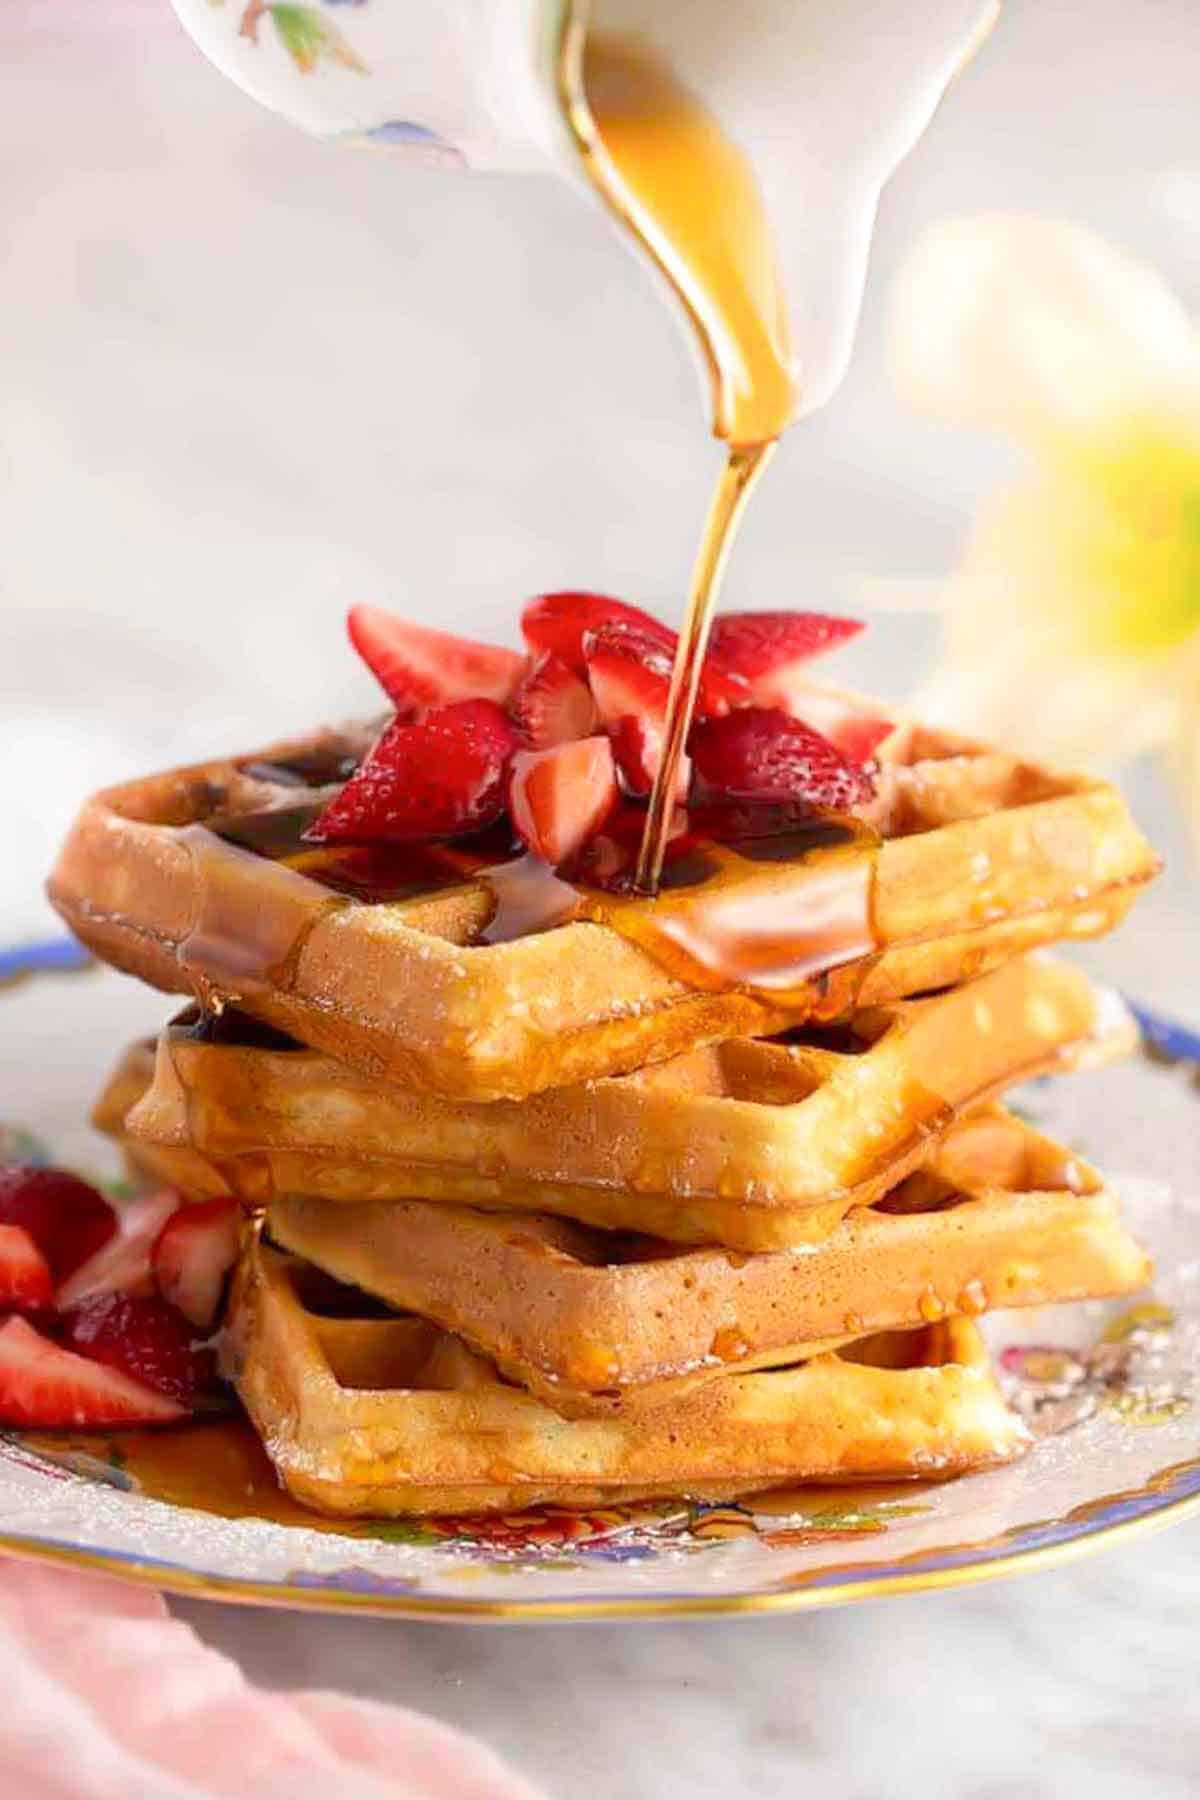 A stack of waffles and strawberries with syrup poured over top.